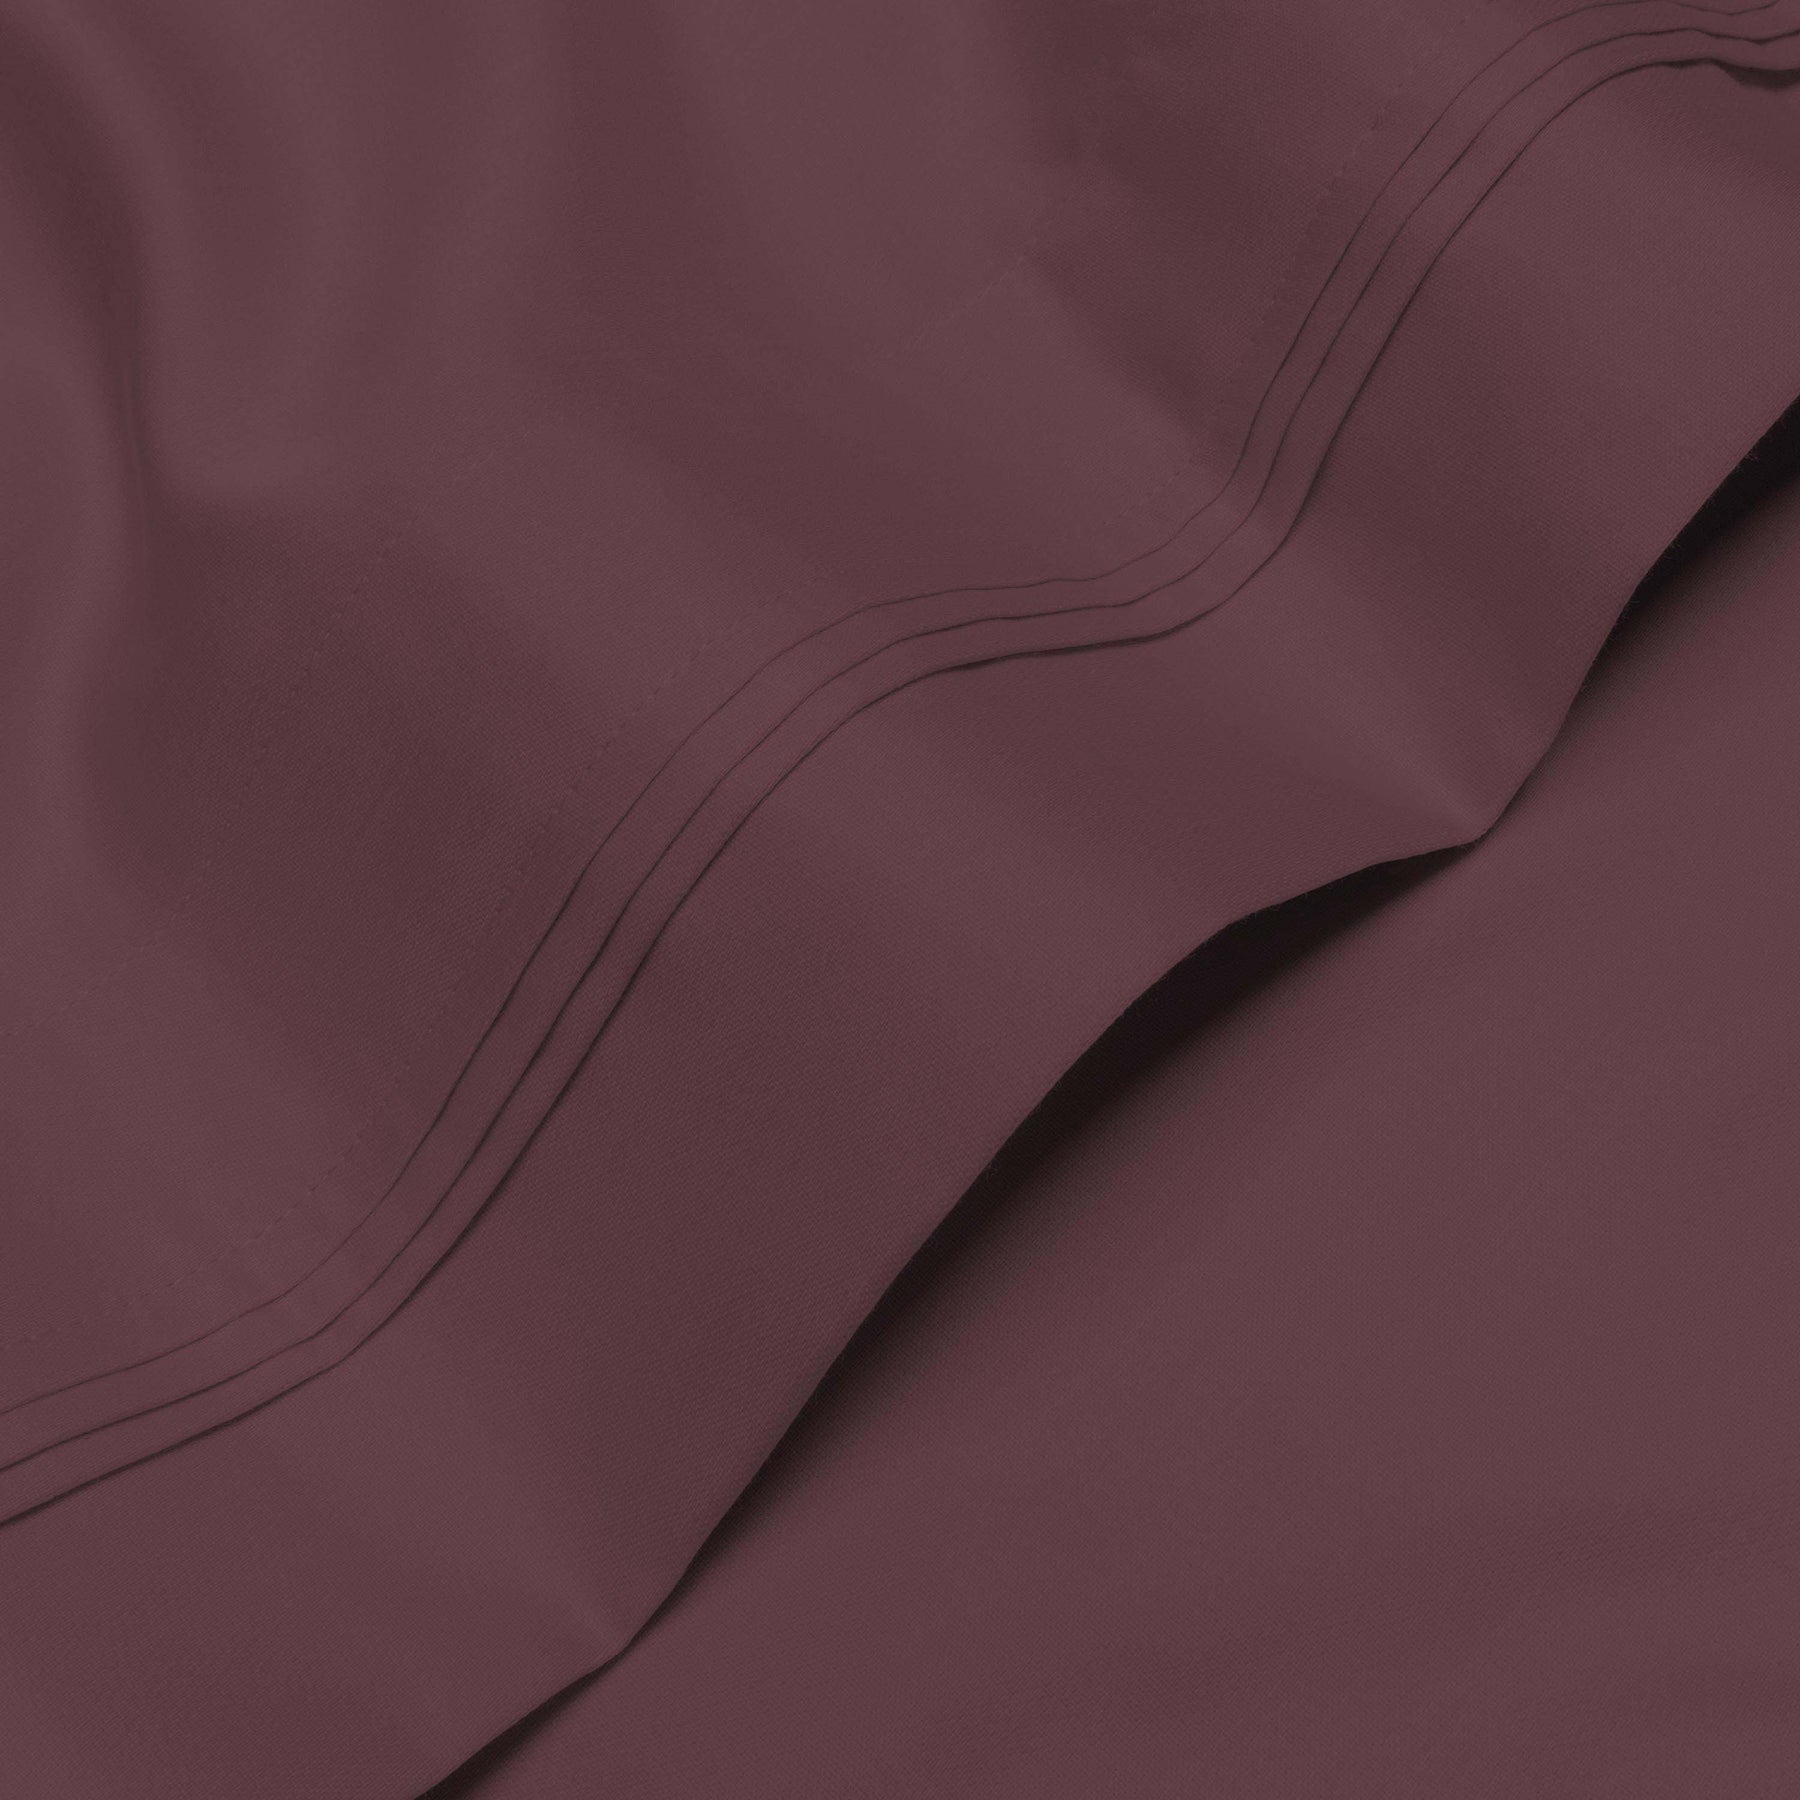 Egyptian Cotton 1000 Thread Count Eco-Friendly Solid Sheet Set - Plum